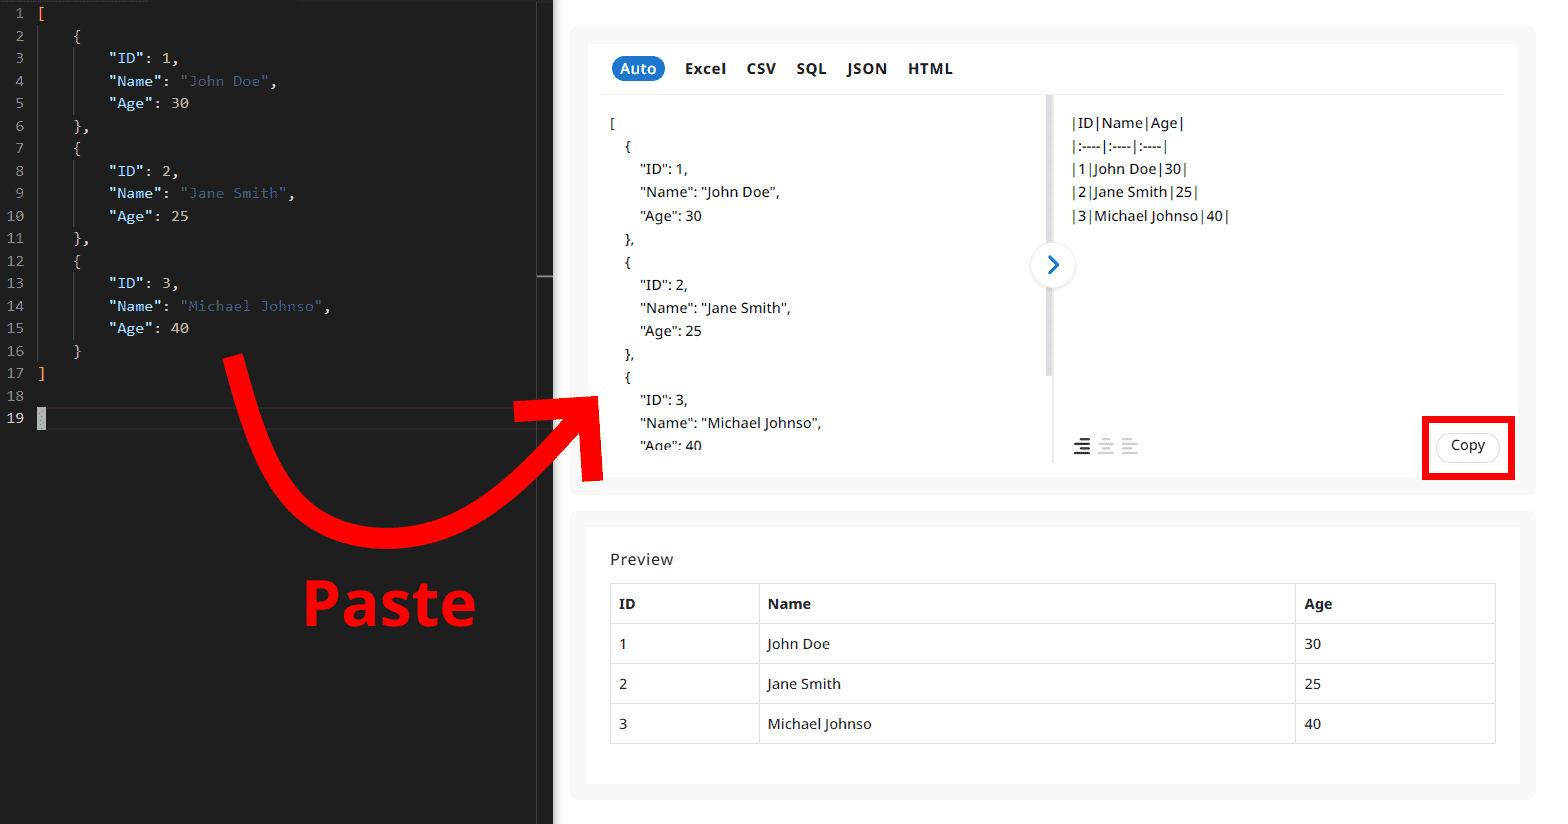 Paste JSON text into the text area, then copy the execution result.